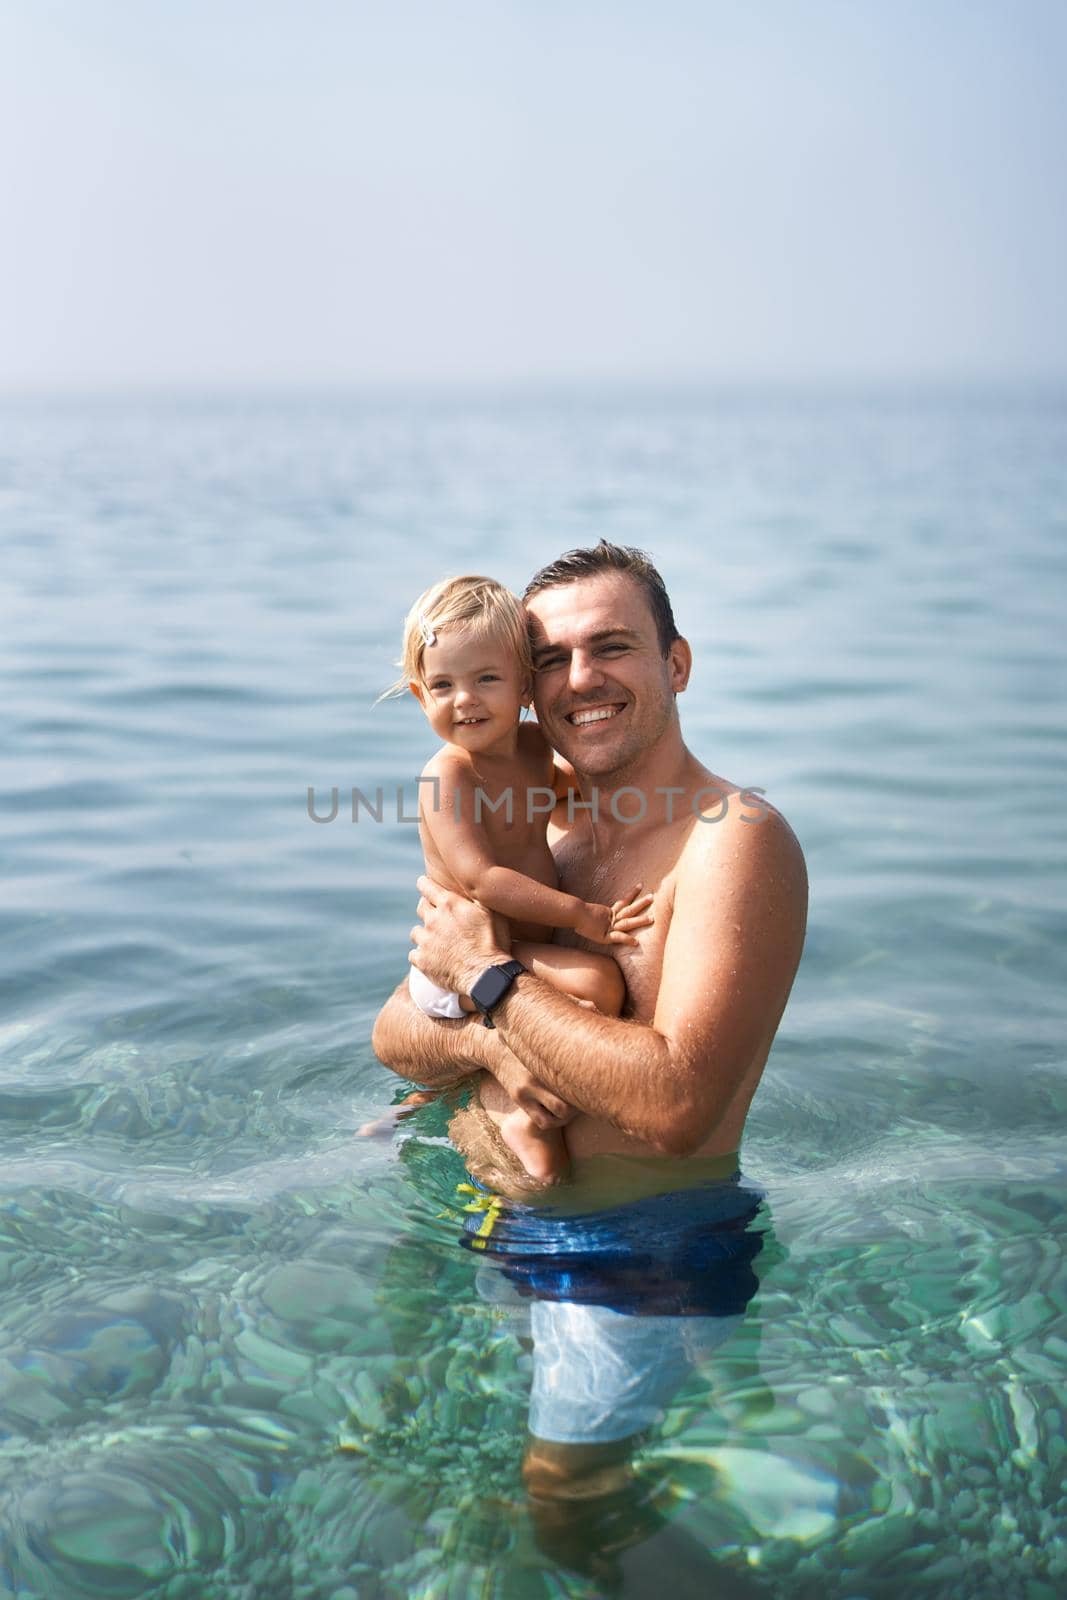 Smiling dad with little girl standing in the sea. High quality photo